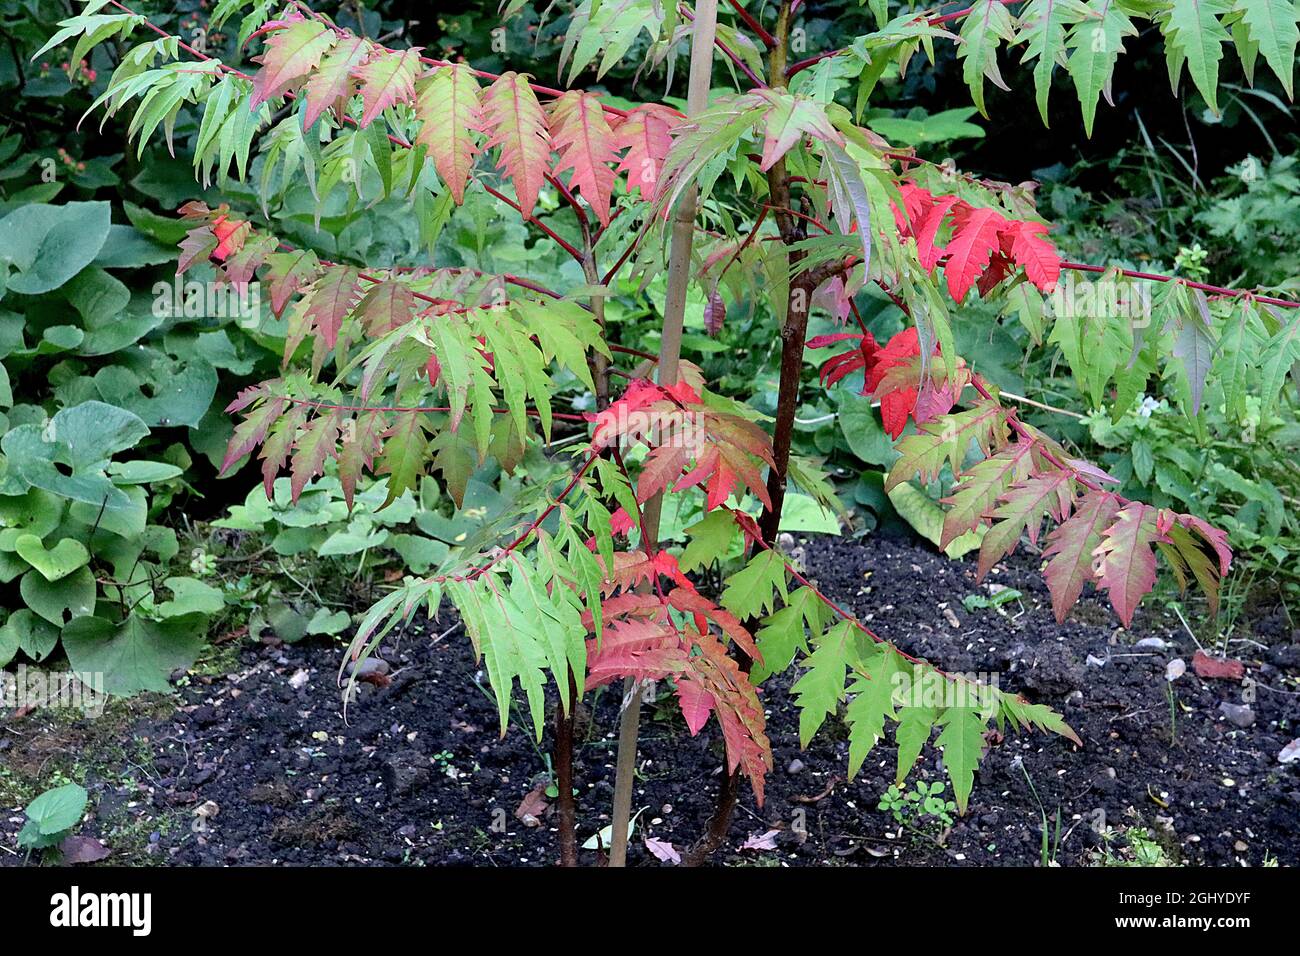 Rhus typhina ‘Dissecta’ cut-leaved stag’s horn sumach – arching red stems of green and red finely dissected leaves,  August, England, UK Stock Photo